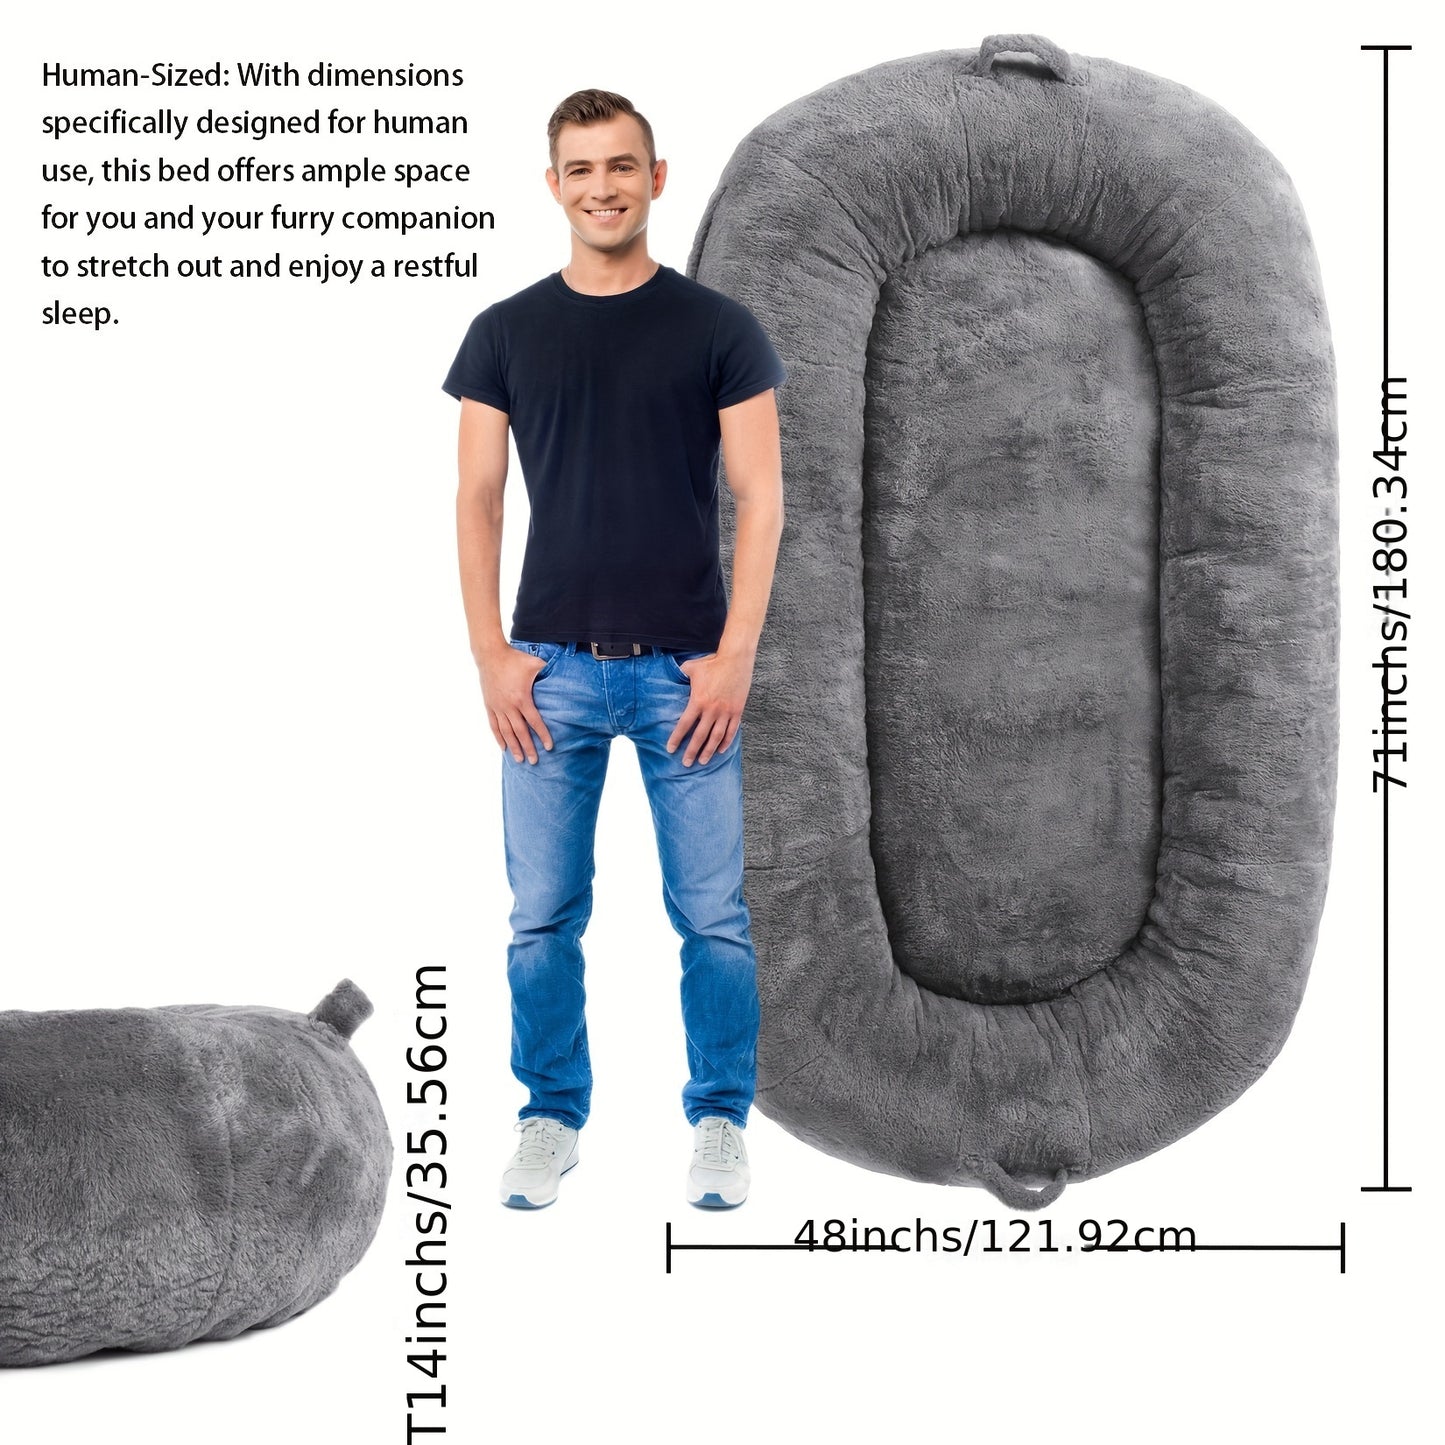 Giant Dog Bed for Men and Women, 75"x48"x14" - Washable & Plush Dog Bed for People, Suitable for Adults, Human-Sized Bed